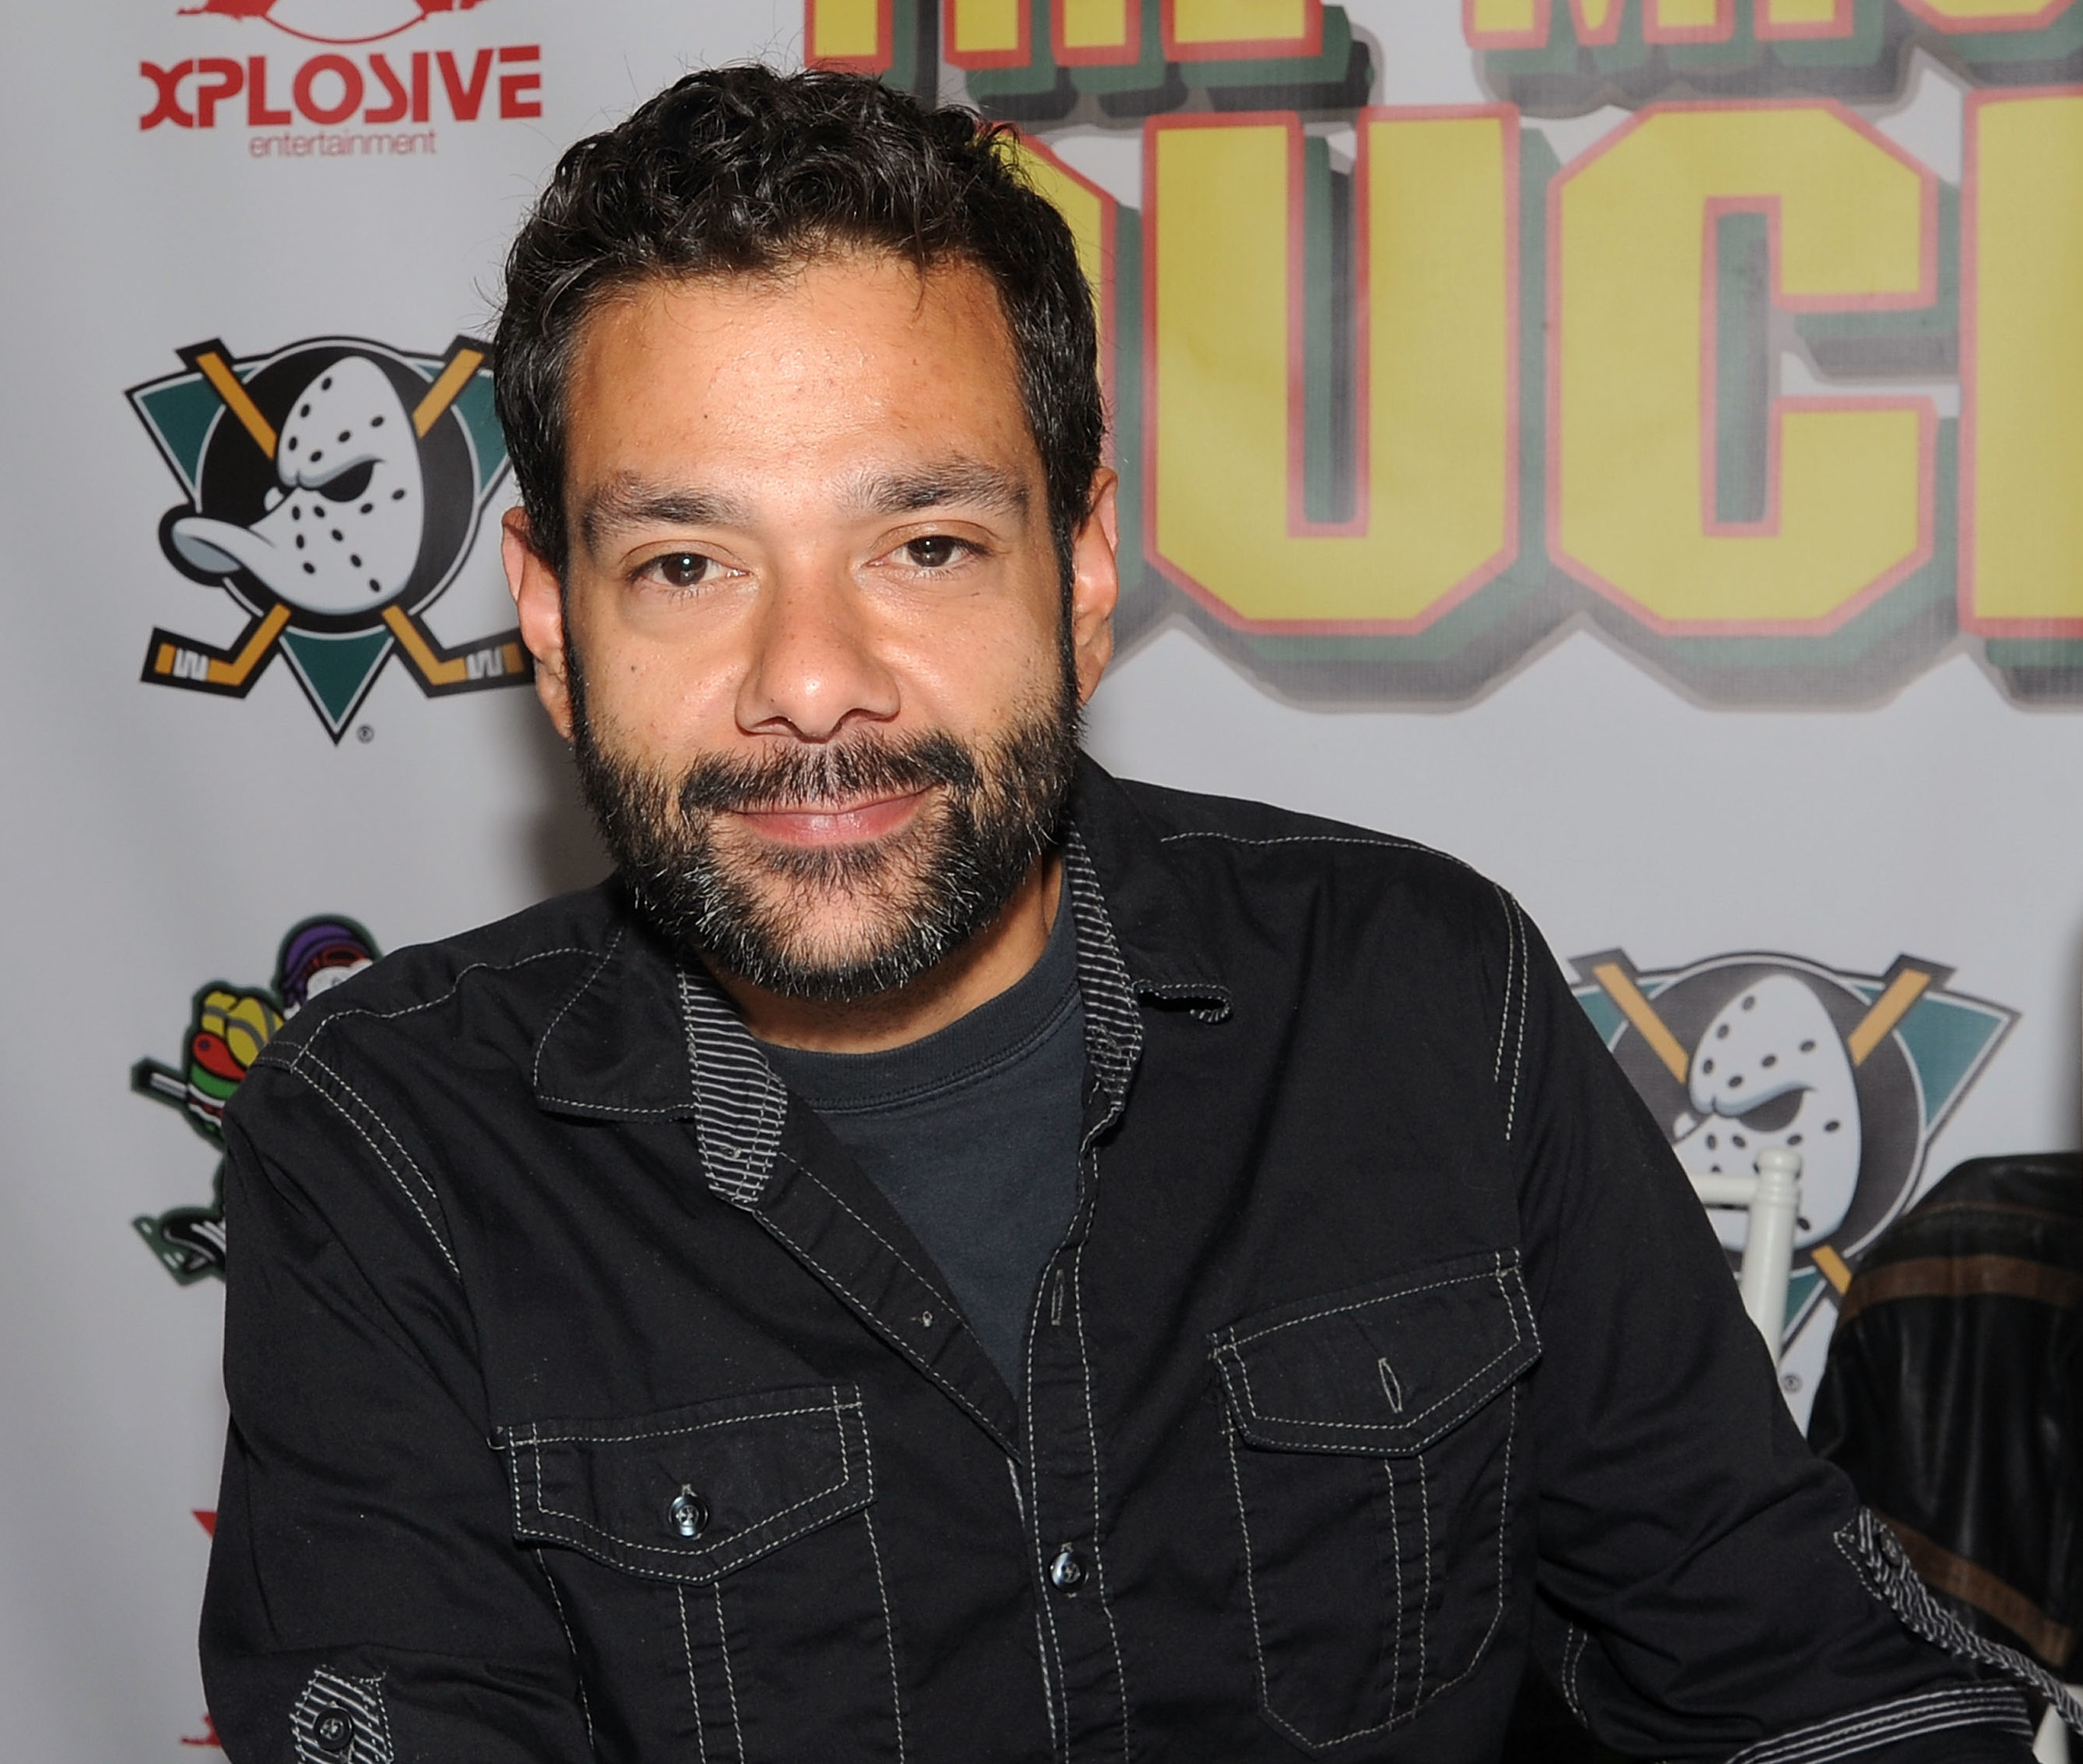 CONSEQUENCE on X: Shaun Weiss, the actor who played Goldberg in